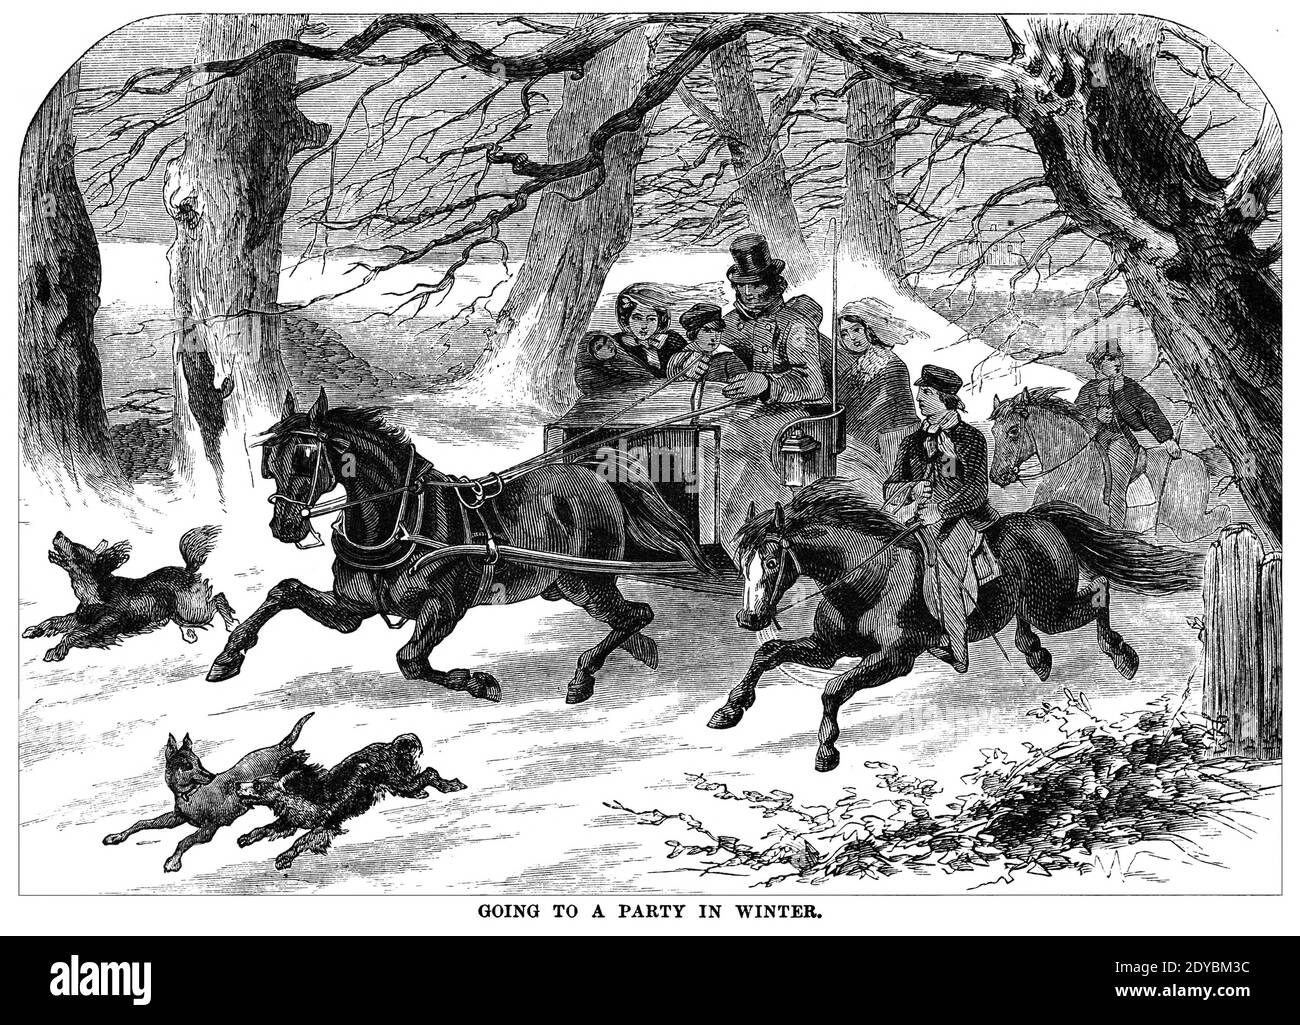 Going to a Party in Winter From Godey's Lady's Book and Magazine, January 1864, Philadelphia, Louis A. Godey, Sarah Josepha Hale, Stock Photo